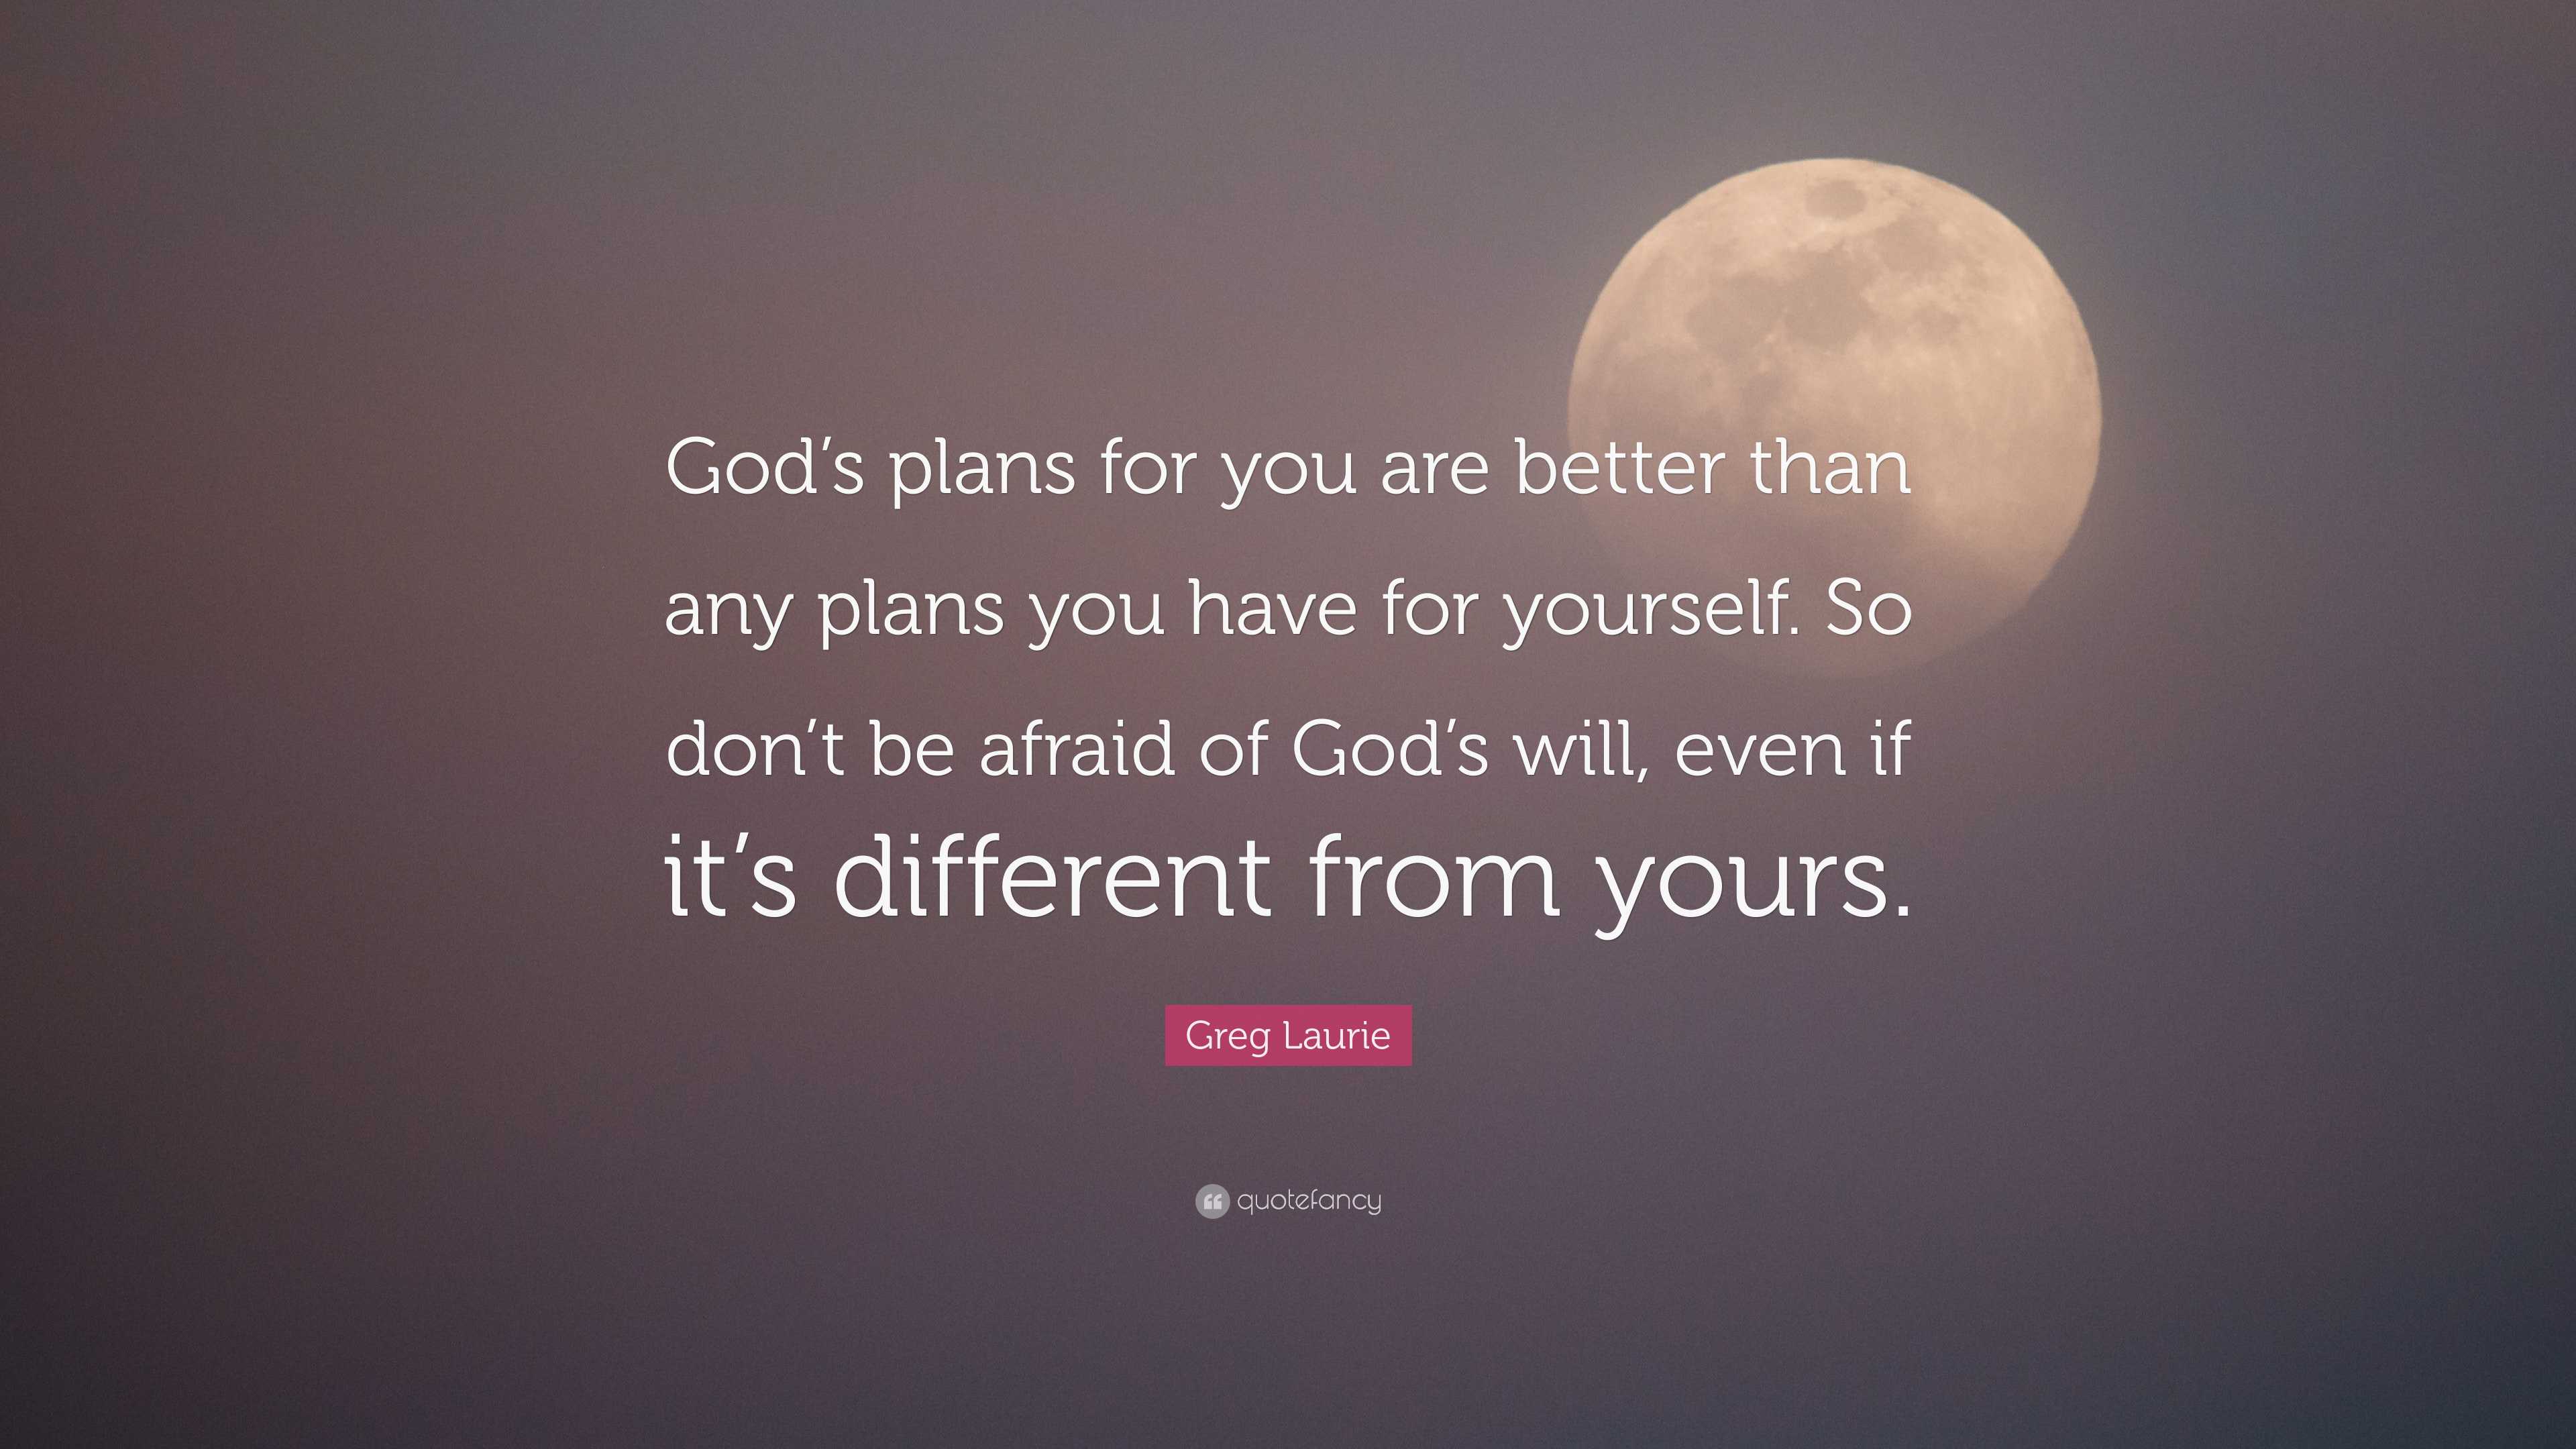 Greg Laurie Quote: “God's plans for you are better than any plans you have  for yourself. So don't be afraid of God's will, even if it's diff”